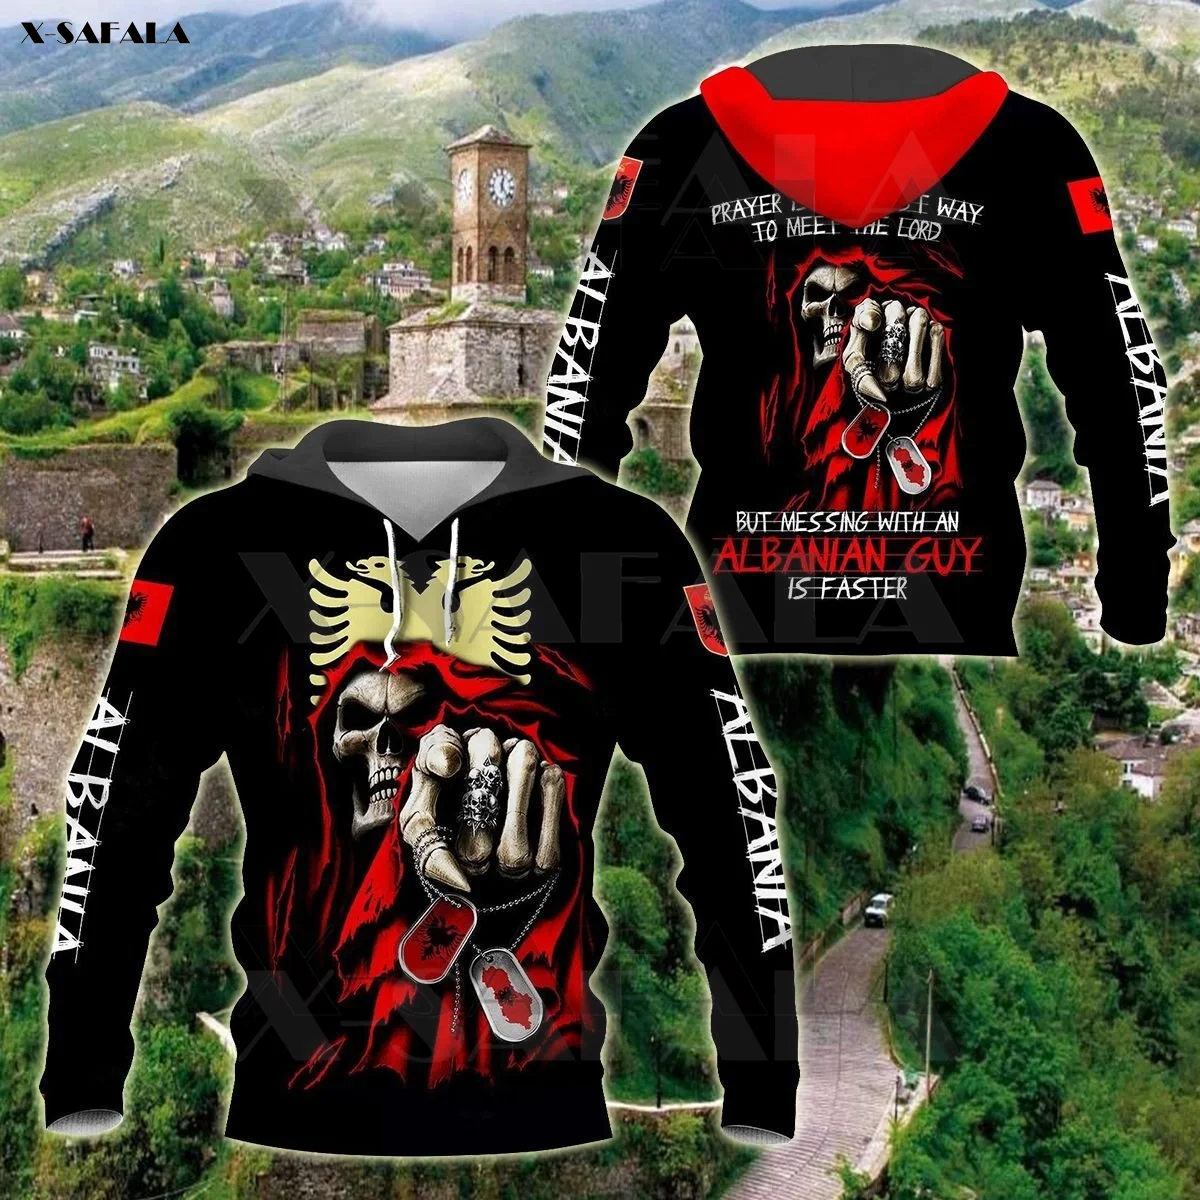 

ALBANIA SKULL PRAYER IS THE BEST WAY TO ME BLESS THE Lord Printed Zipper Hoodie Man Military Pullover Sweatshirt Hooded Jersey